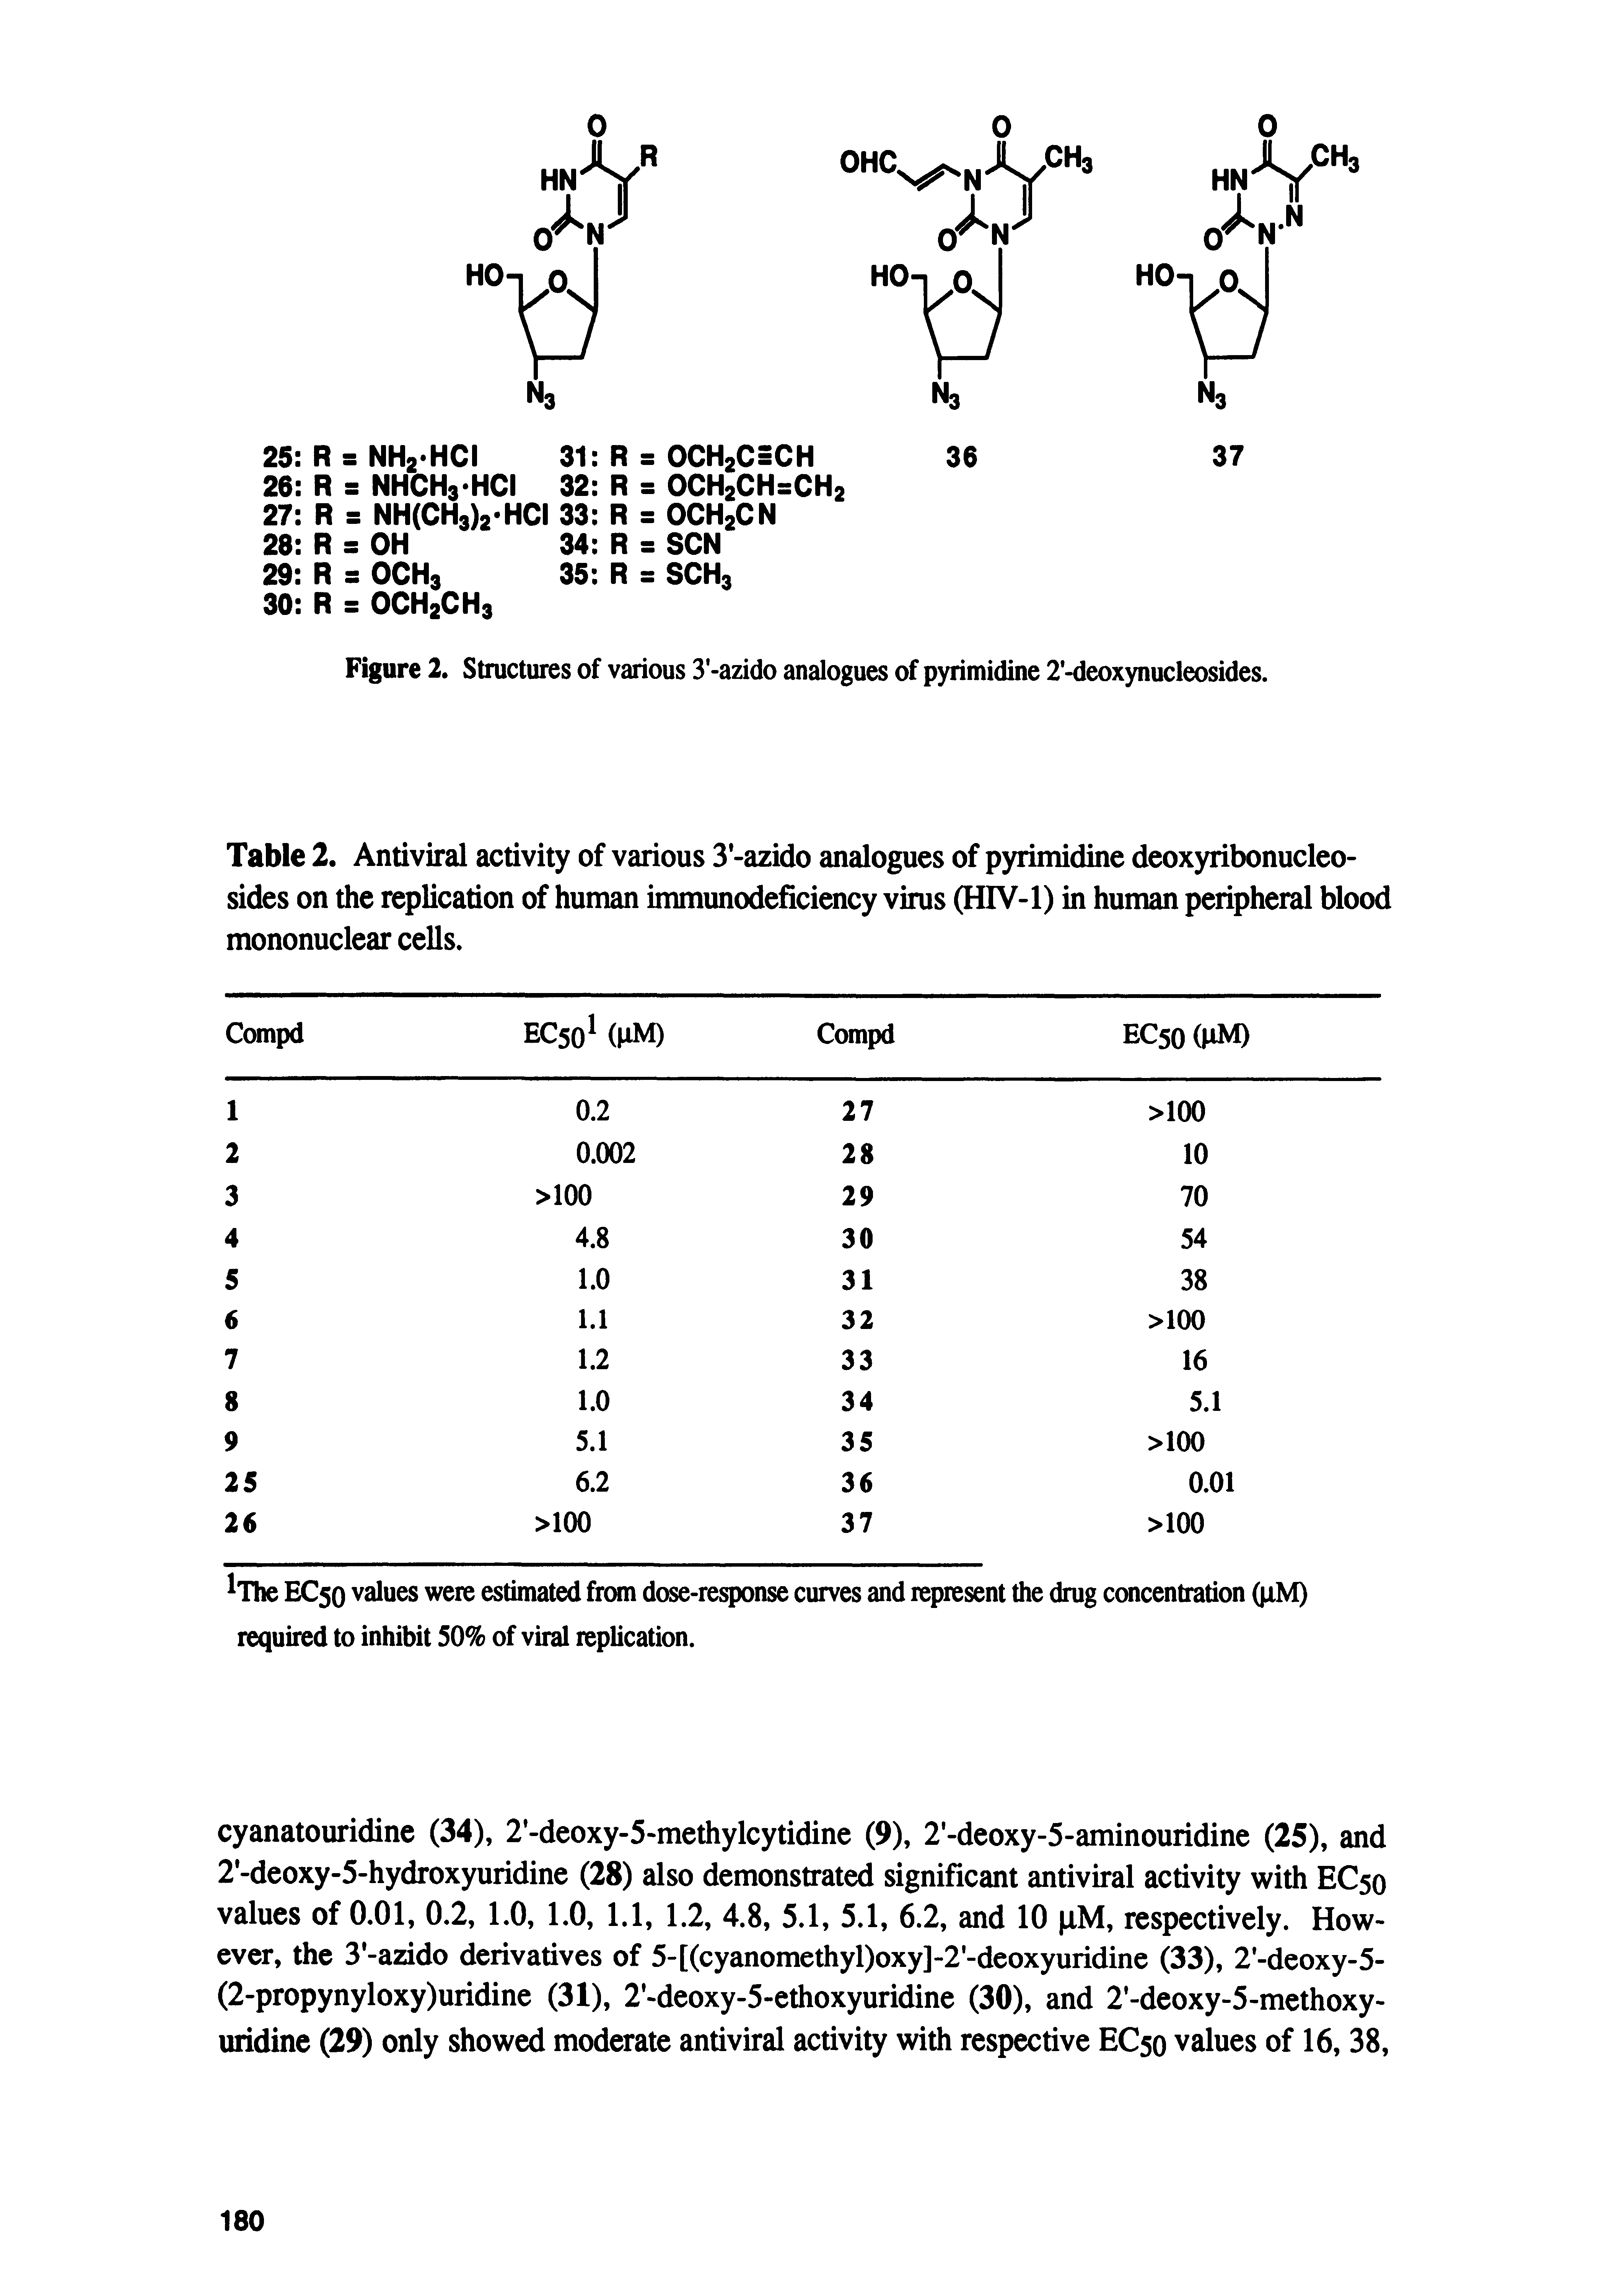 Table 2. Antiviral activity of various 3 -azido analogues of pyrimidine deoxyribonucleo-sides on the replication of human immunodeficiency virus (HIV-1) in human peripheral blood mononuclear cells.